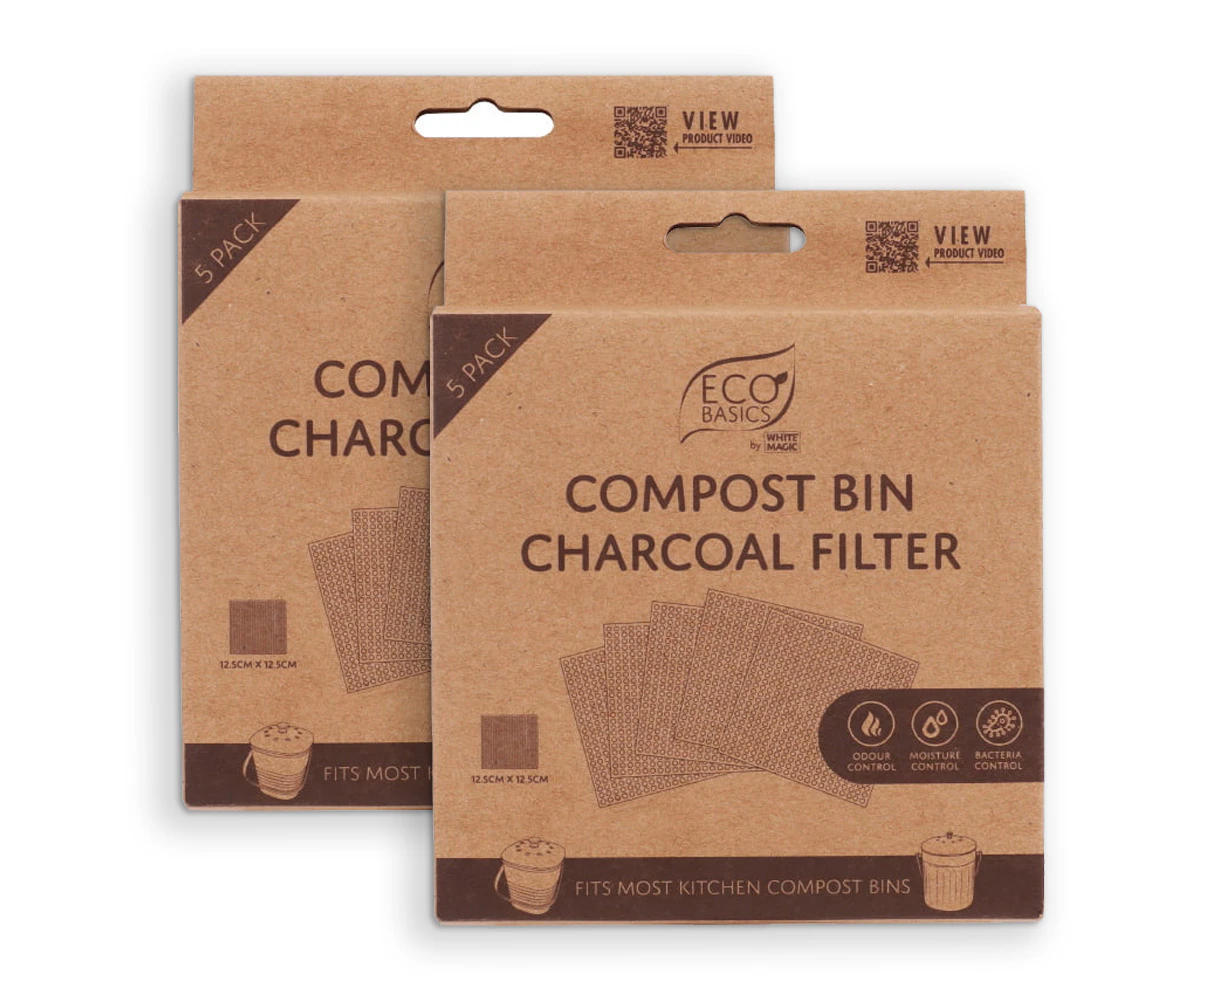 New AVANTI Compost Bin 19cm Replacement Charcoal Carbon Filter Set of 6